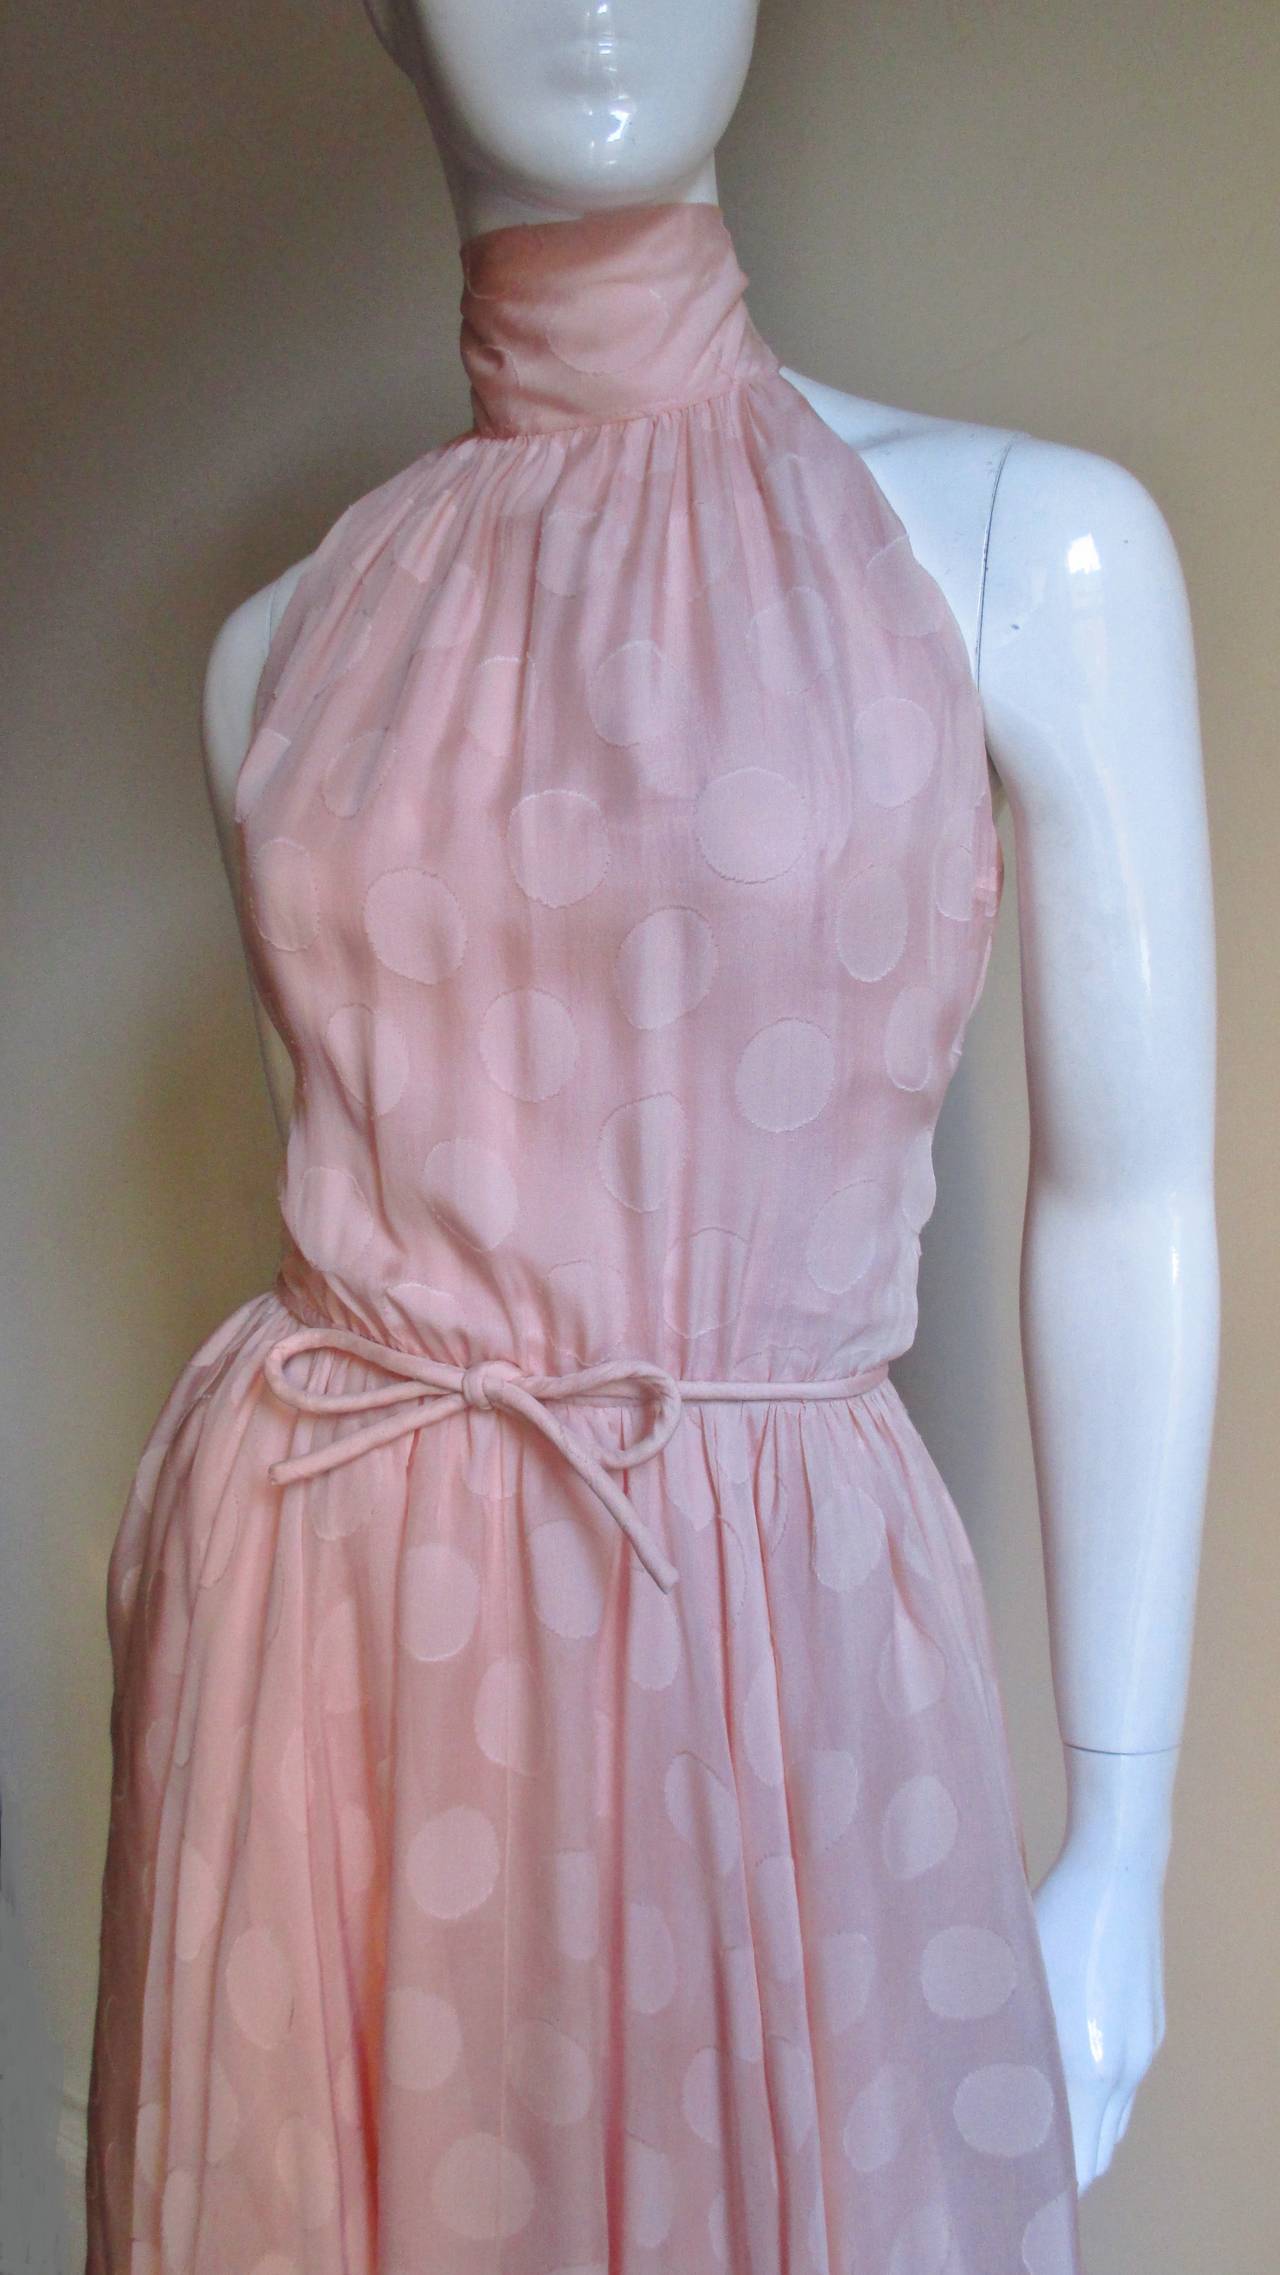 A stunning & feminine pink 1950's numbered dress from Christian Dior.  It is a delicate pink silk damask with circles on a semi sheer  background.  The dress has a halter neck which ties and drapes like a scarf in the back.  The bodice has boning at